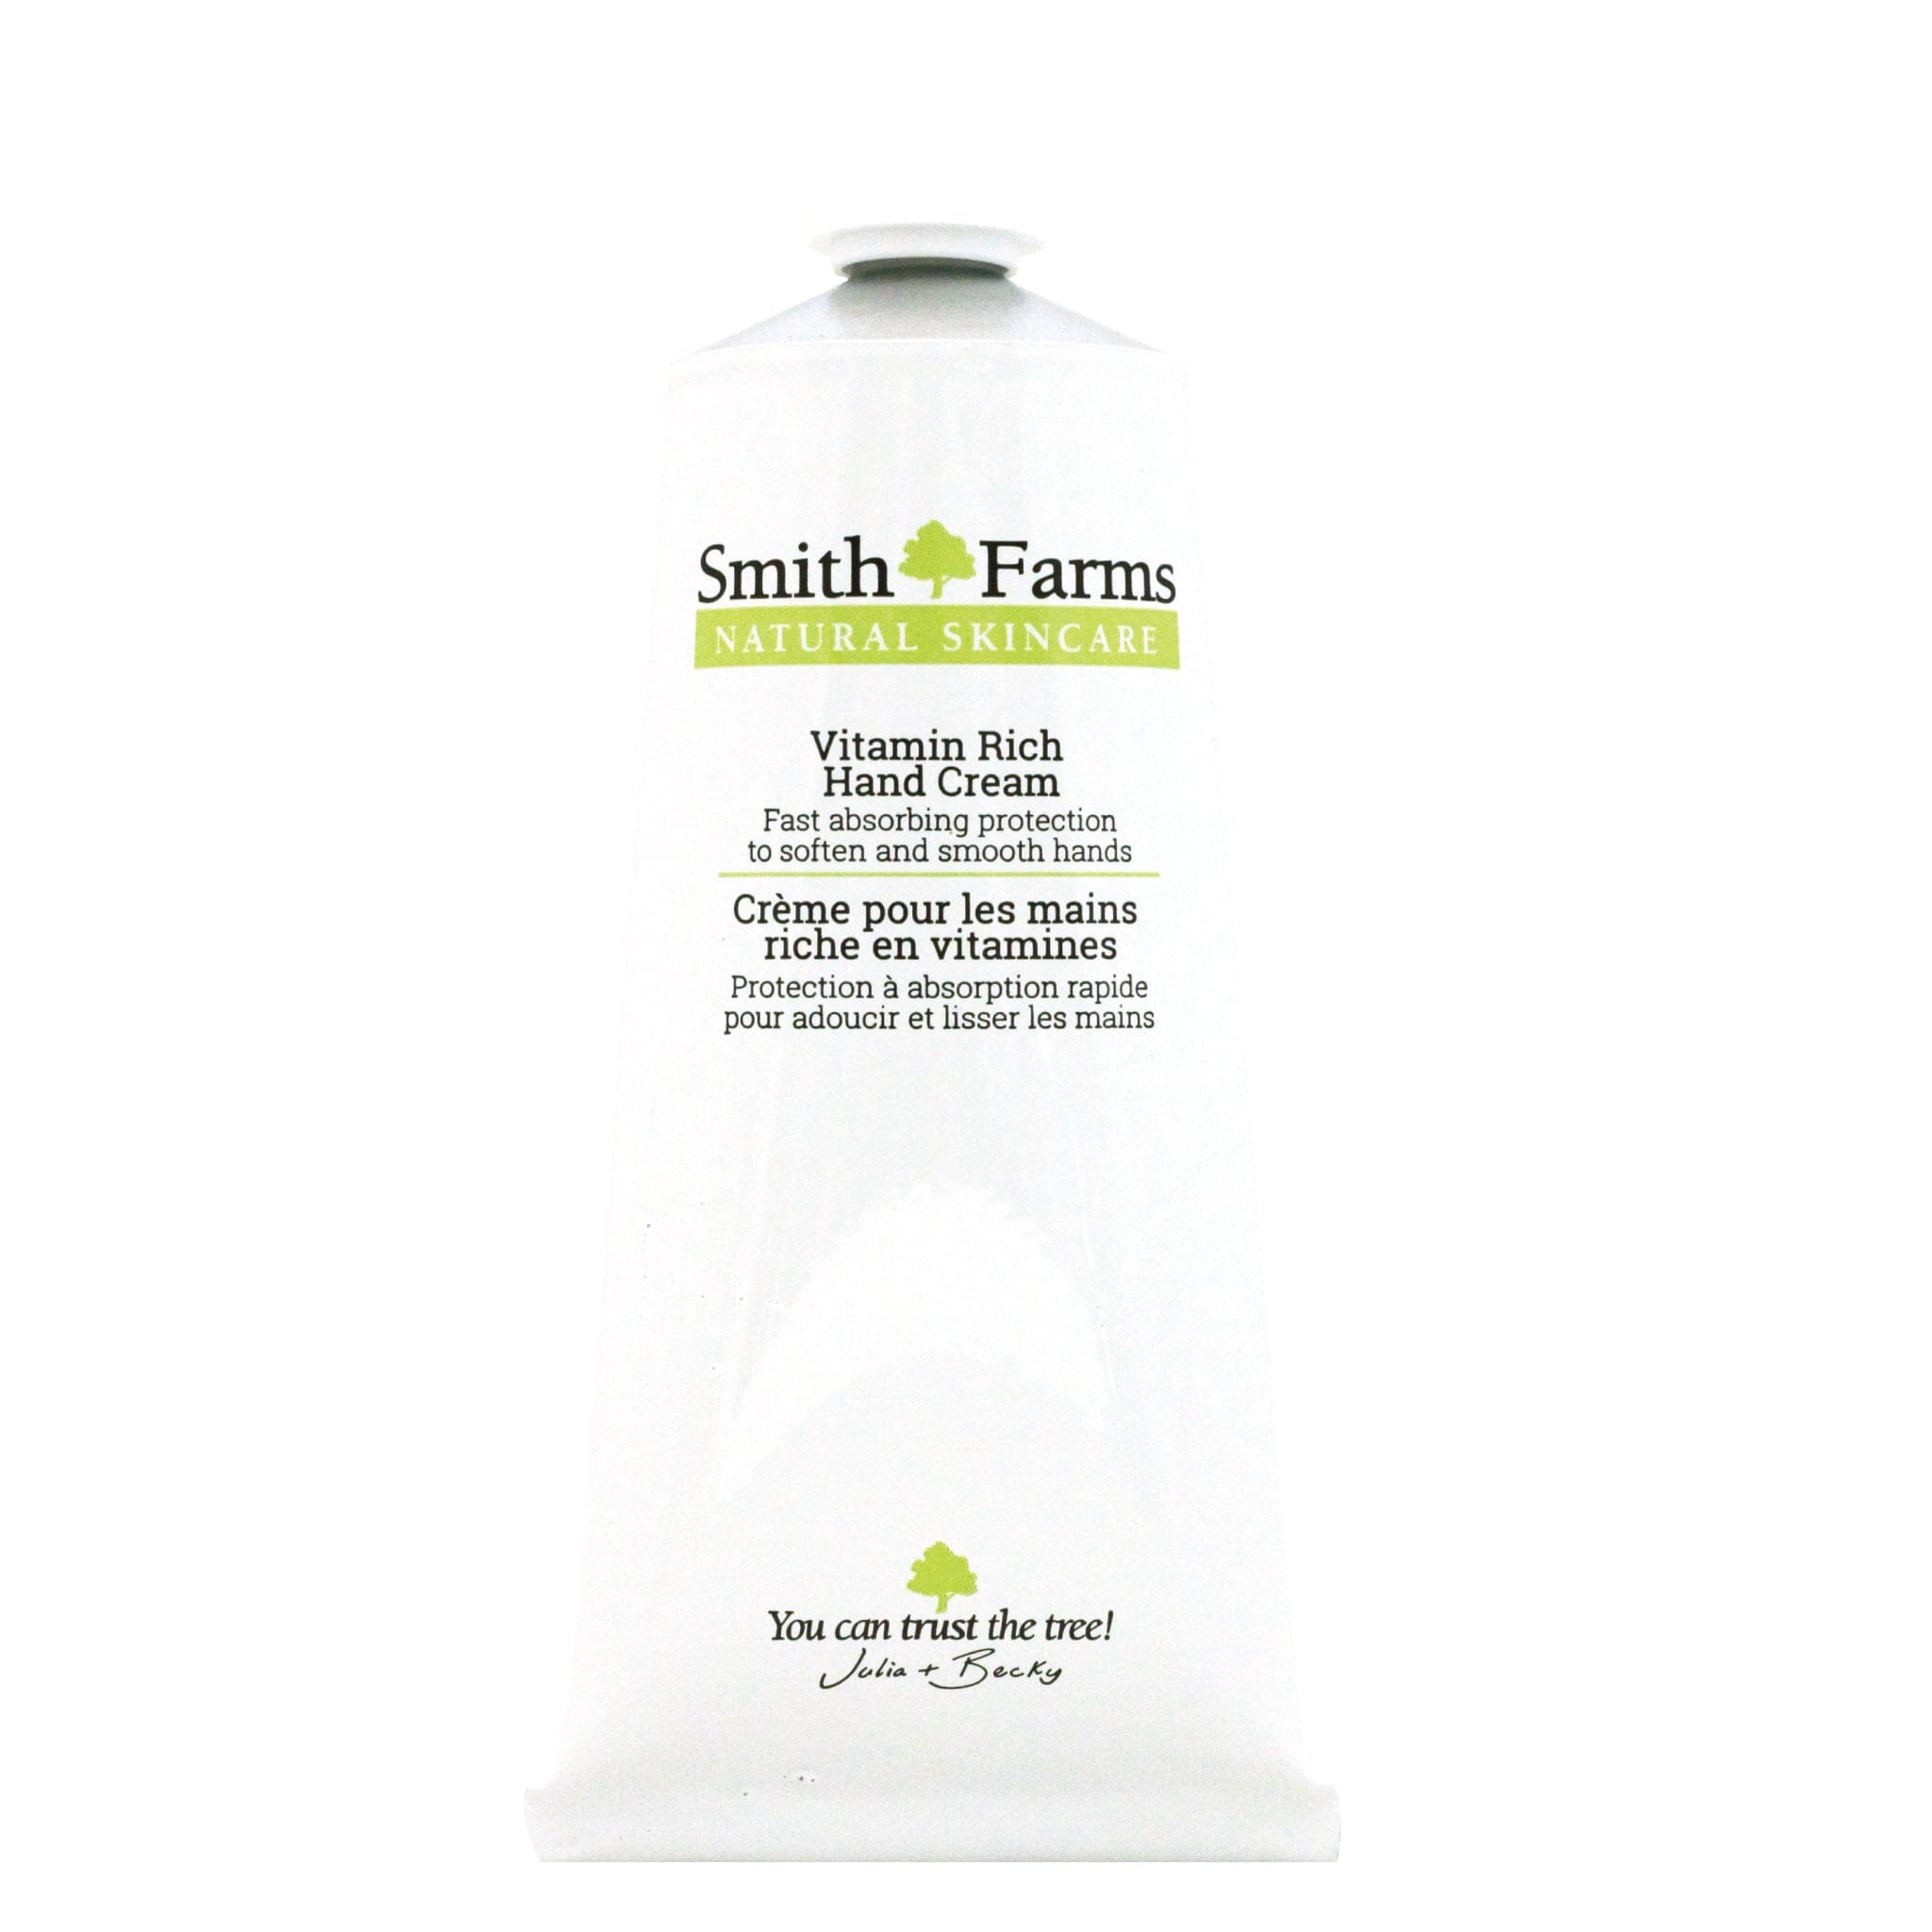 Vitamin Rich Hand Cream Body Care,Our Products Smith Farms 75 ml 